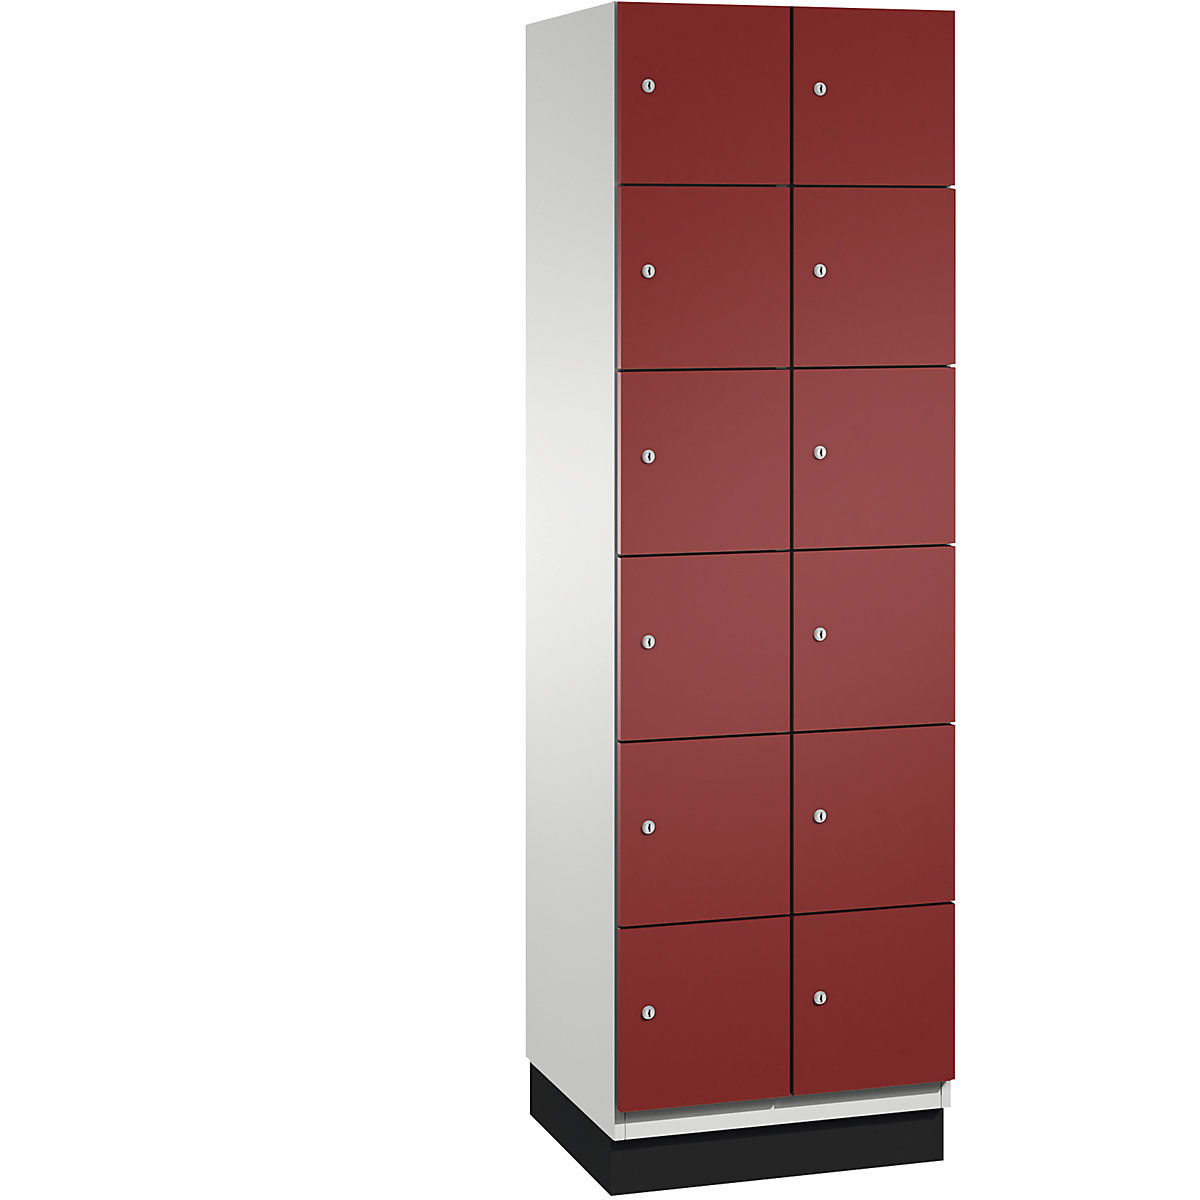 CAMBIO compartment locker with sheet steel doors – C+P, 12 compartments, width 600 mm, body light grey / door ruby red-7